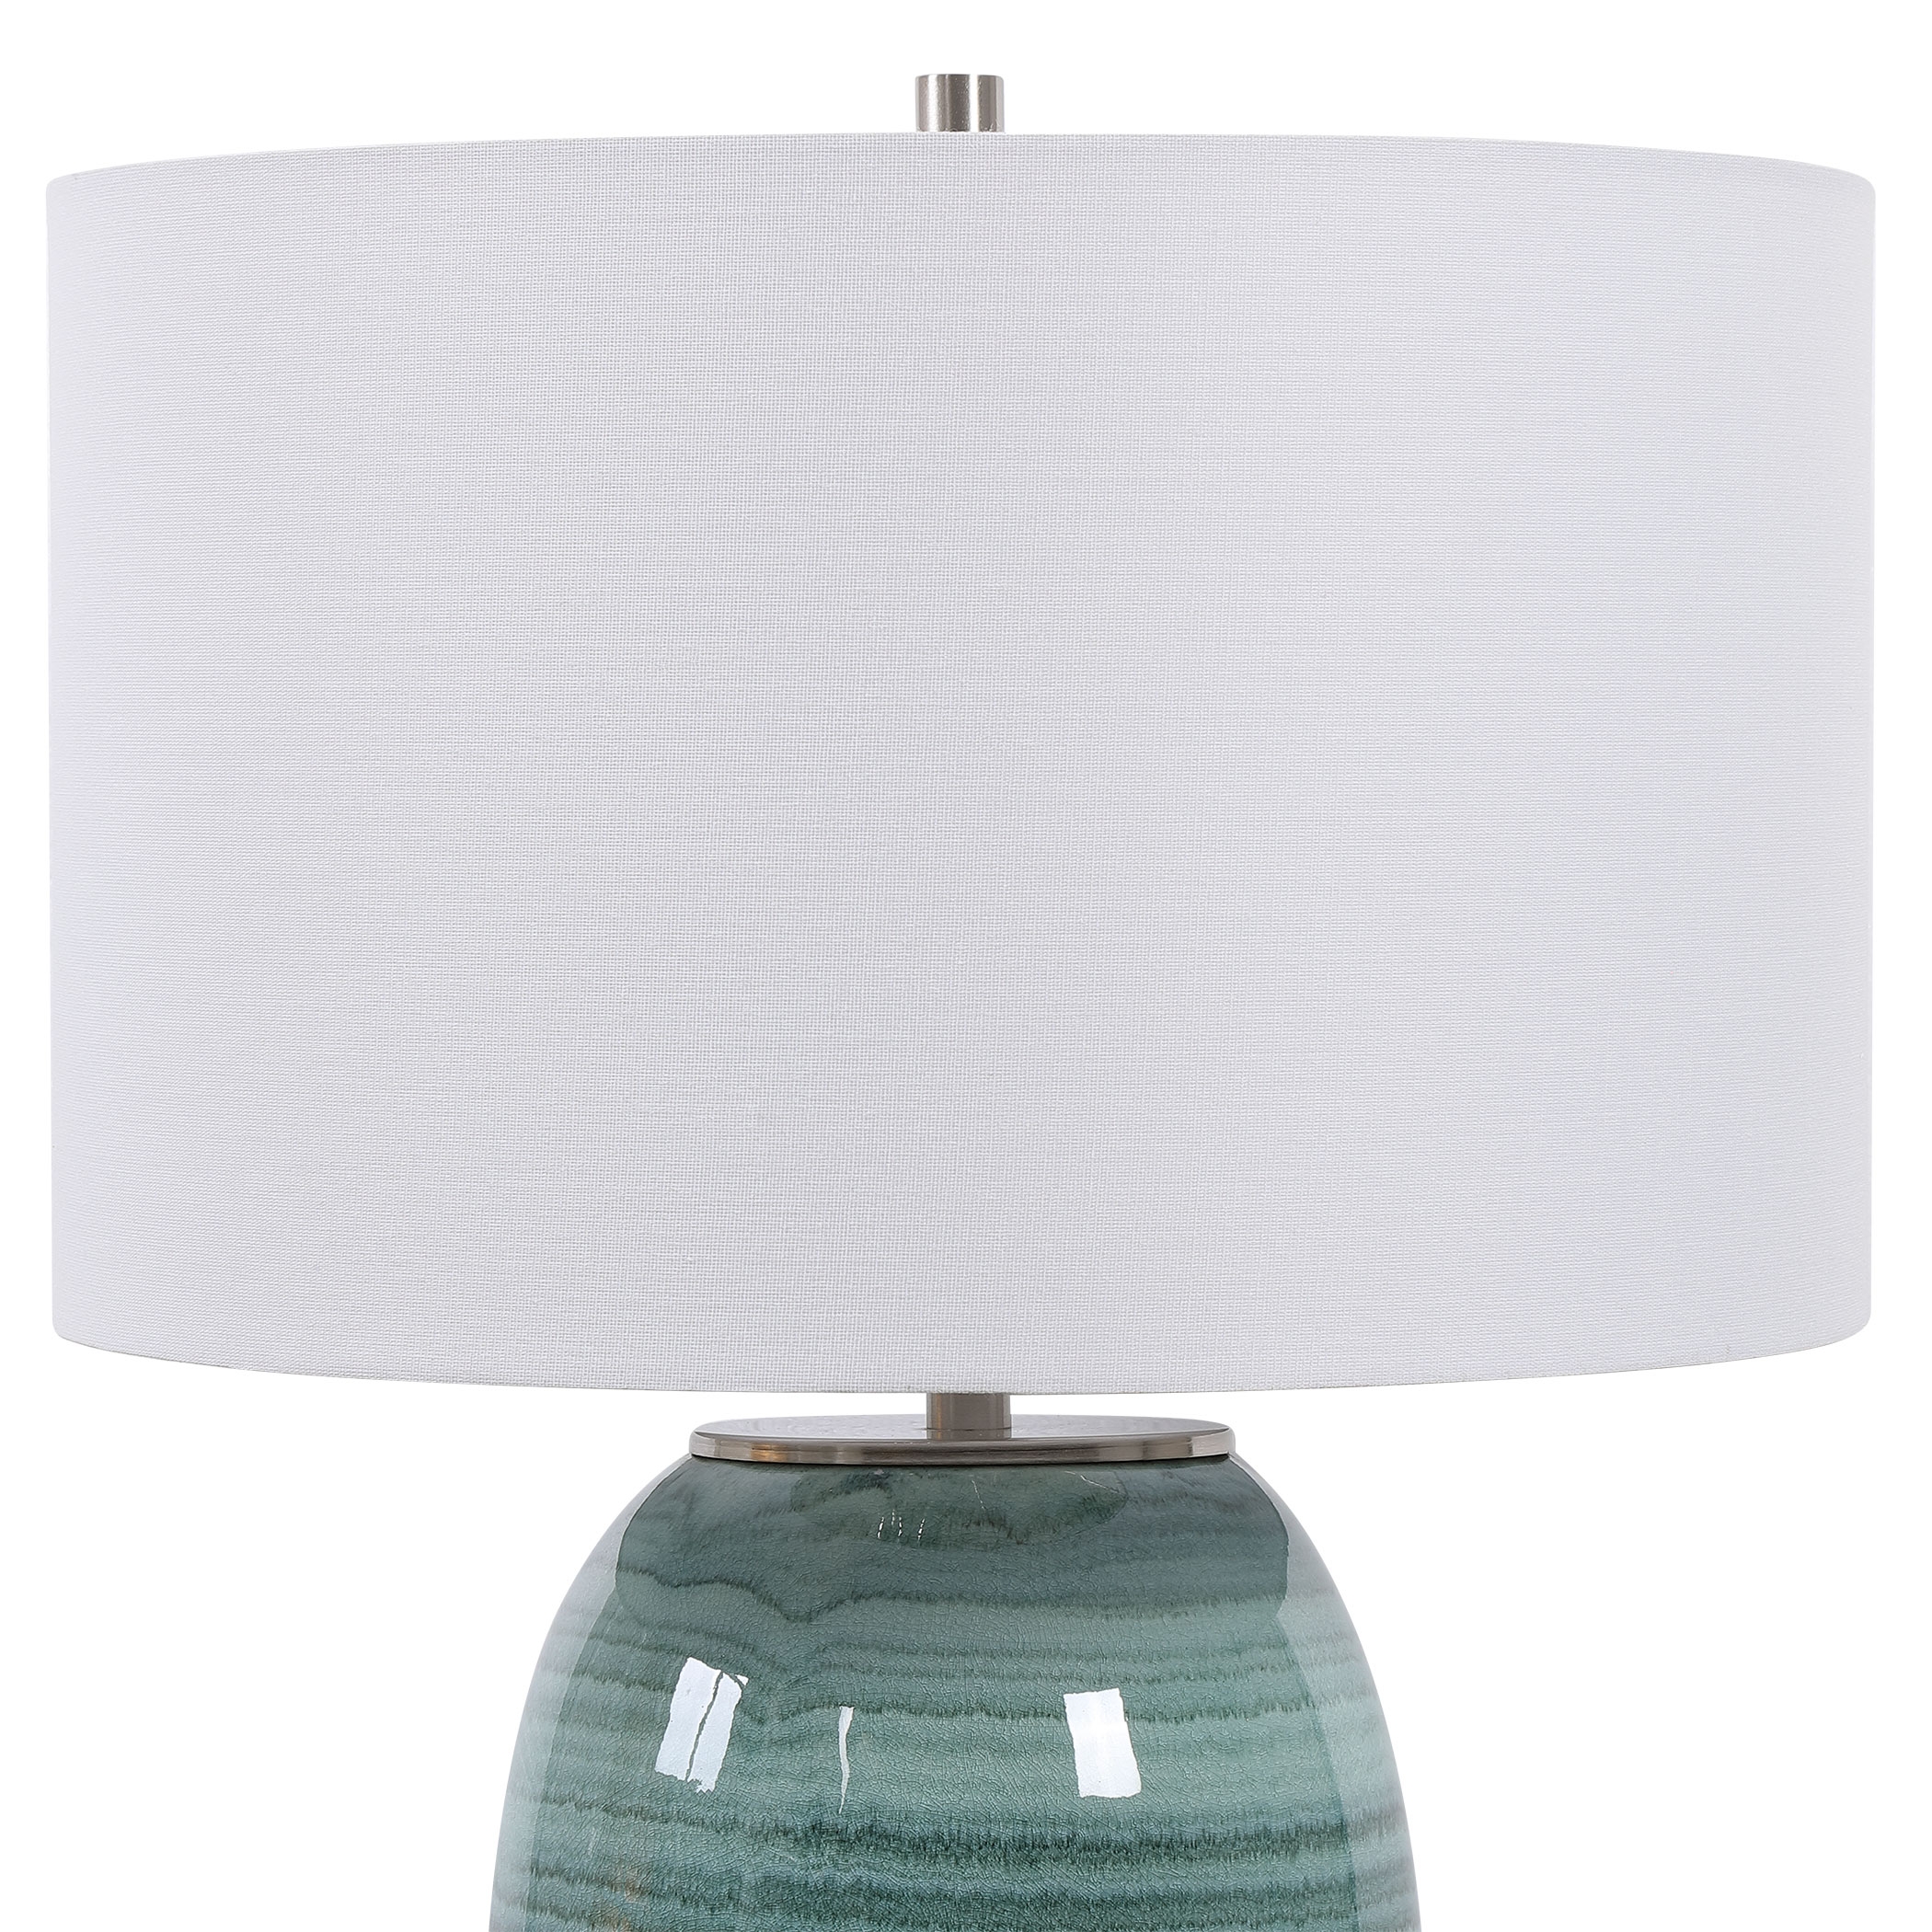 Caicos Teal Table Lamp - Image 3